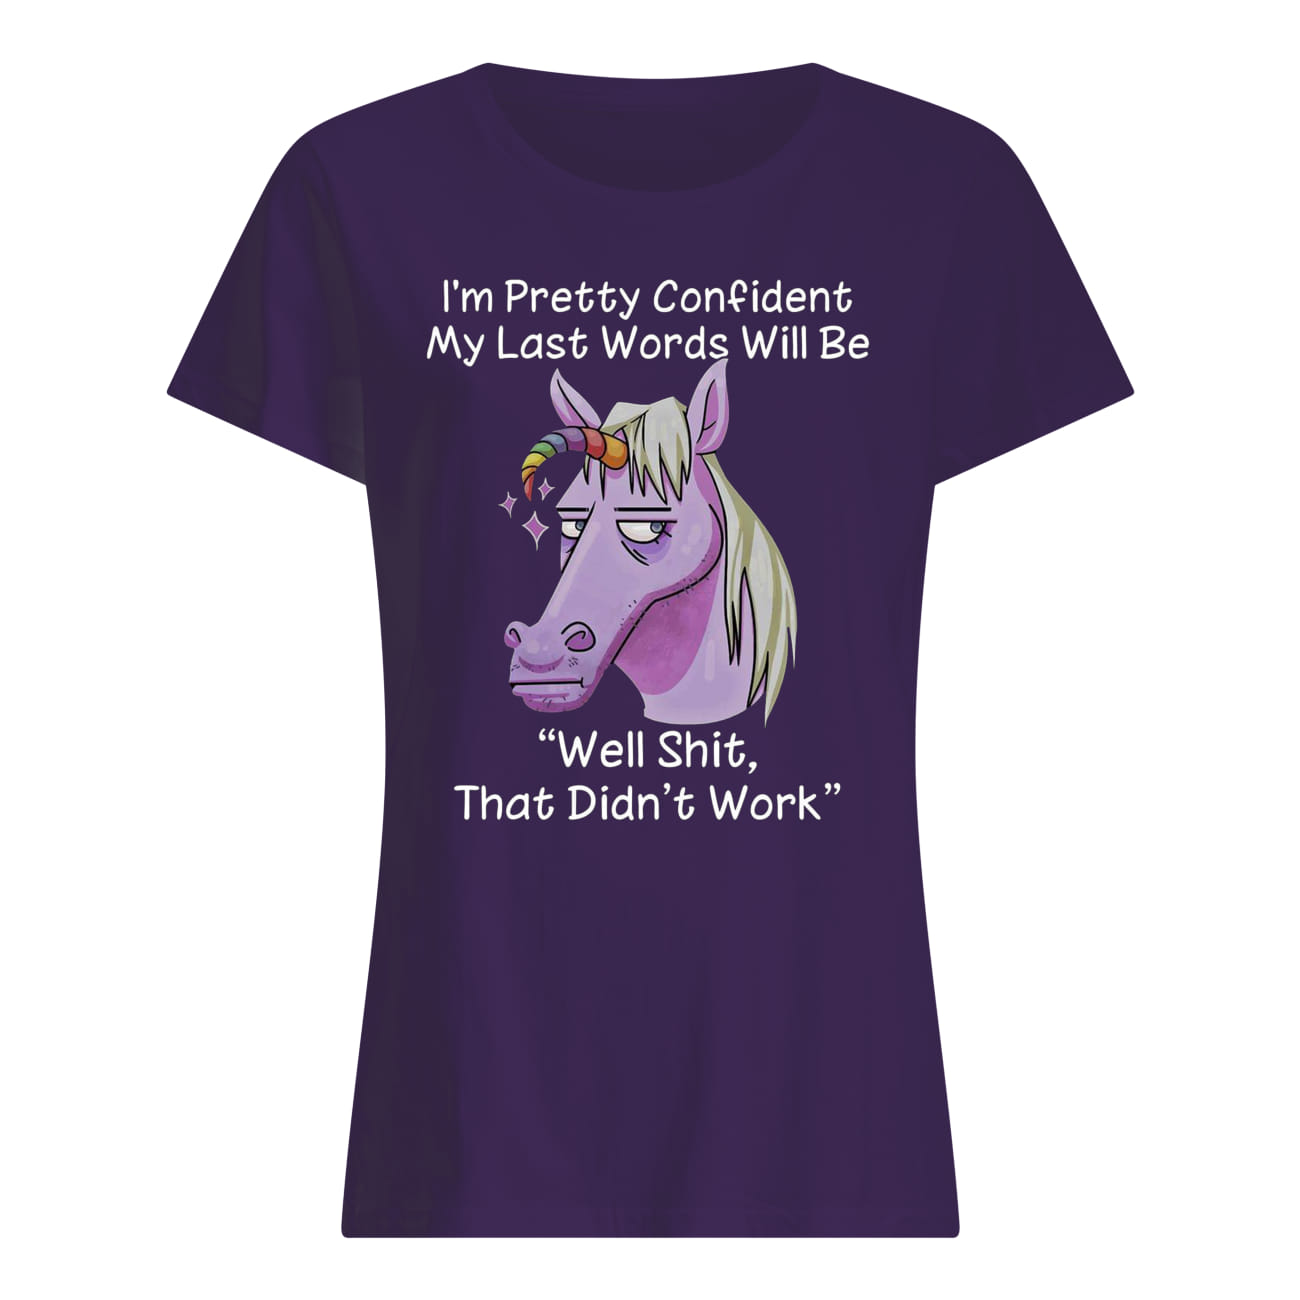 I'm pretty confident my last words will be well shit that didn't work unicorn lady shirt